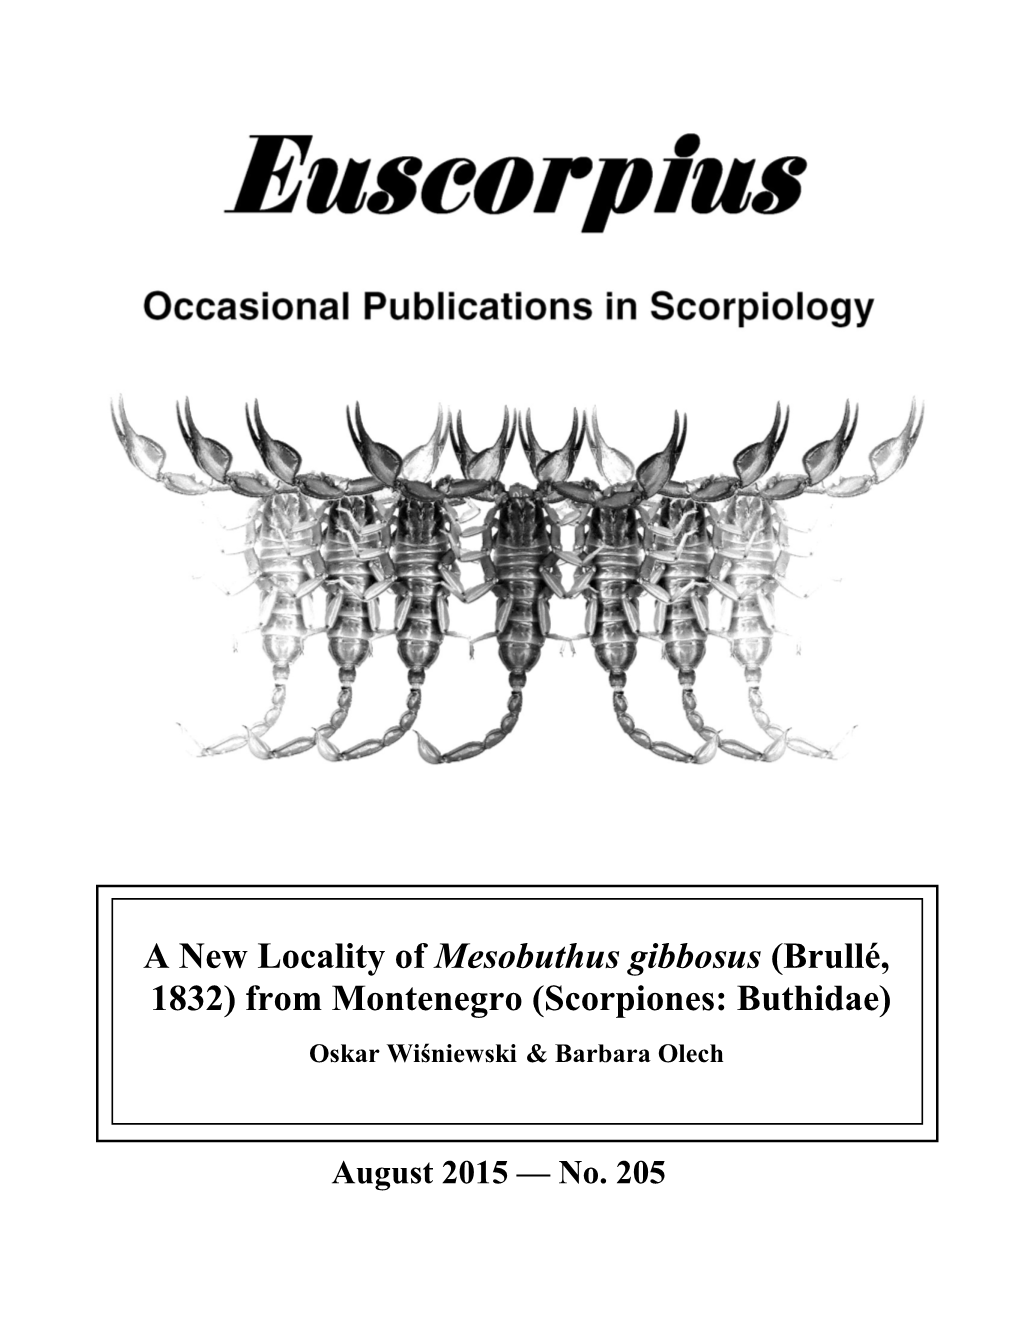 A New Locality of Mesobuthus Gibbosus (Brullé, 1832) from Montenegro (Scorpiones: Buthidae)